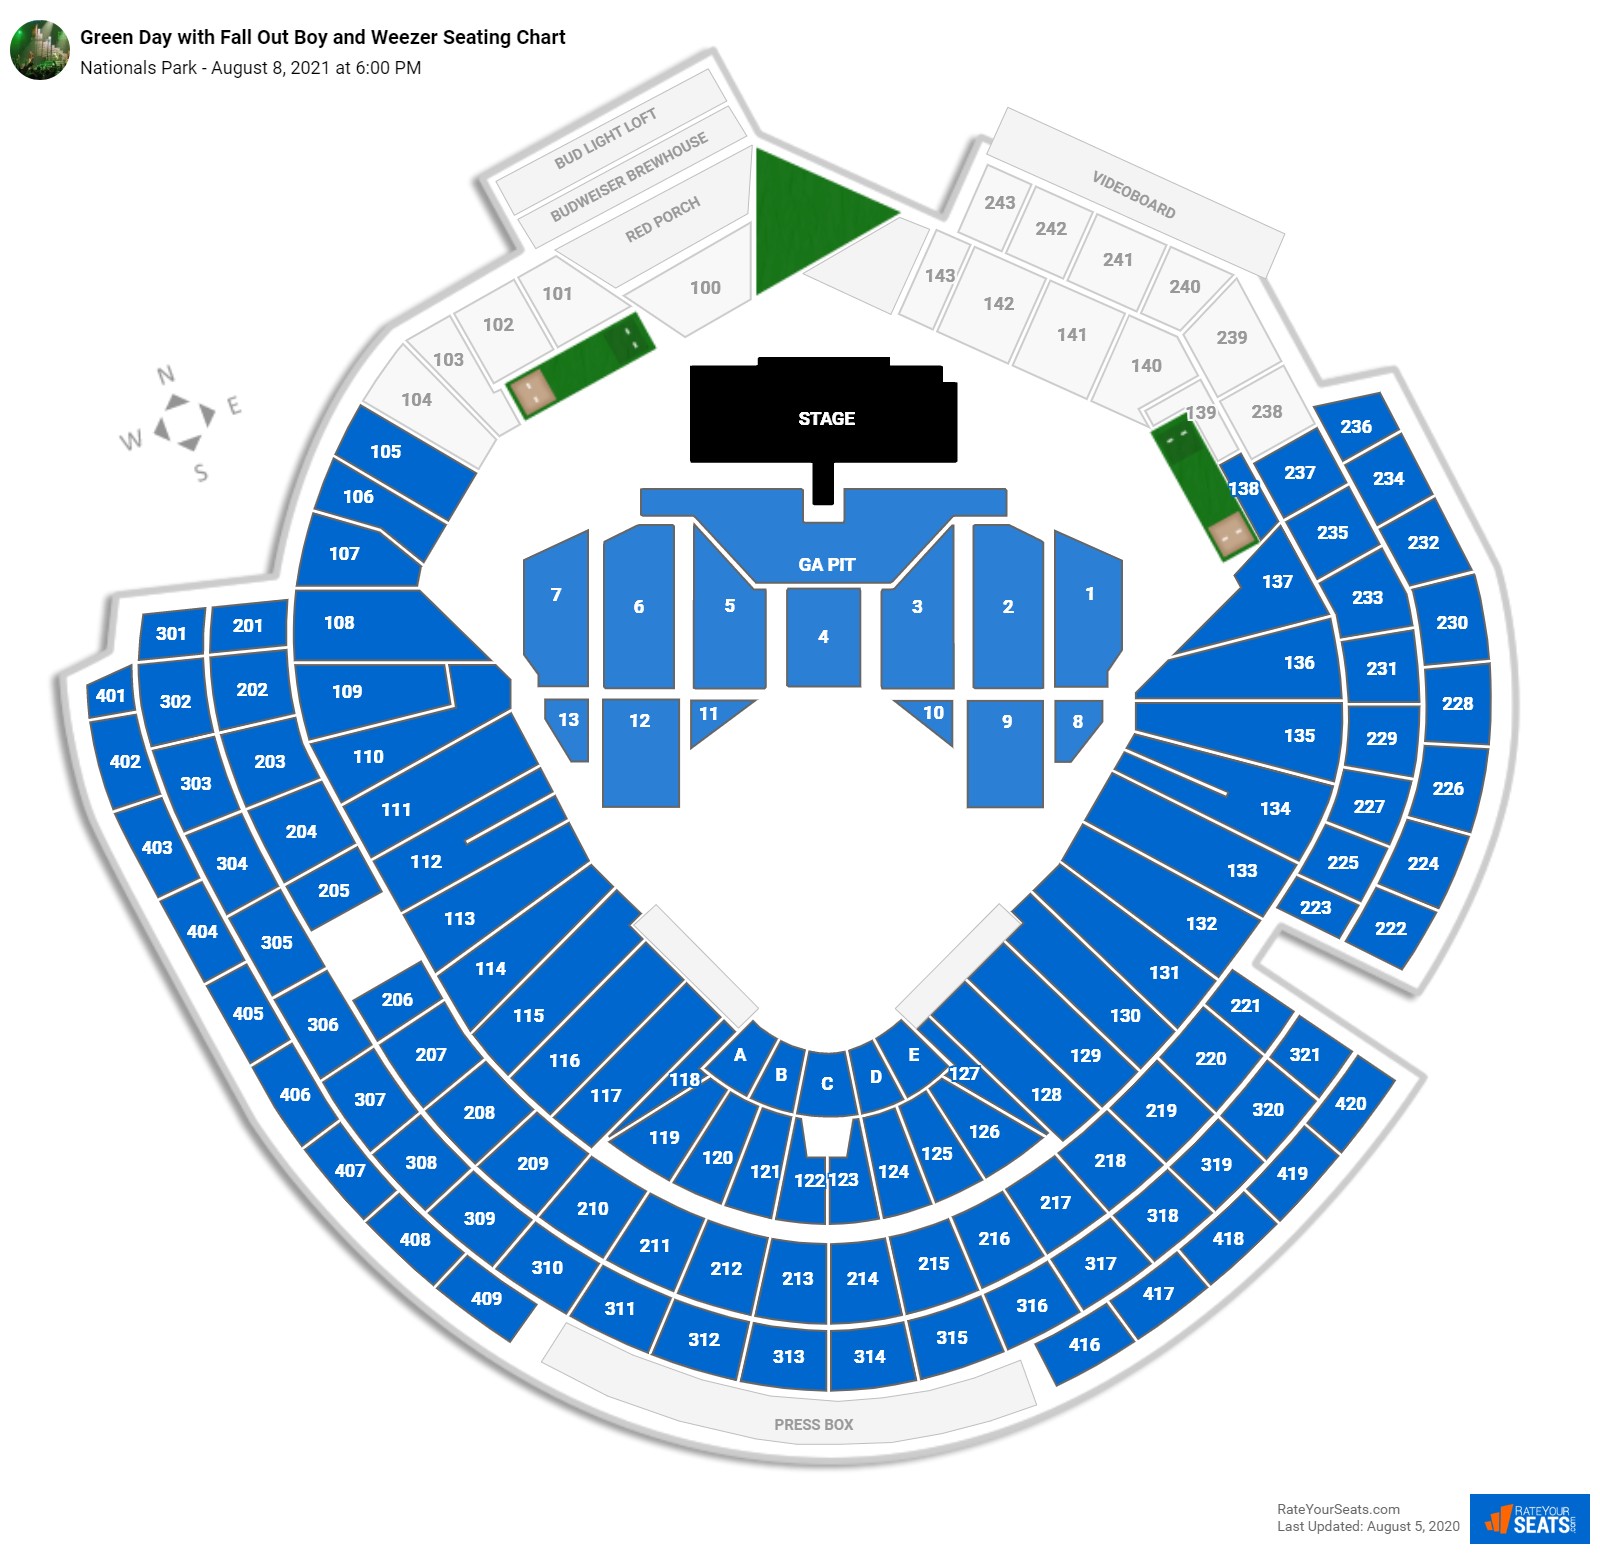 Nationals Park Seating Charts for Concerts